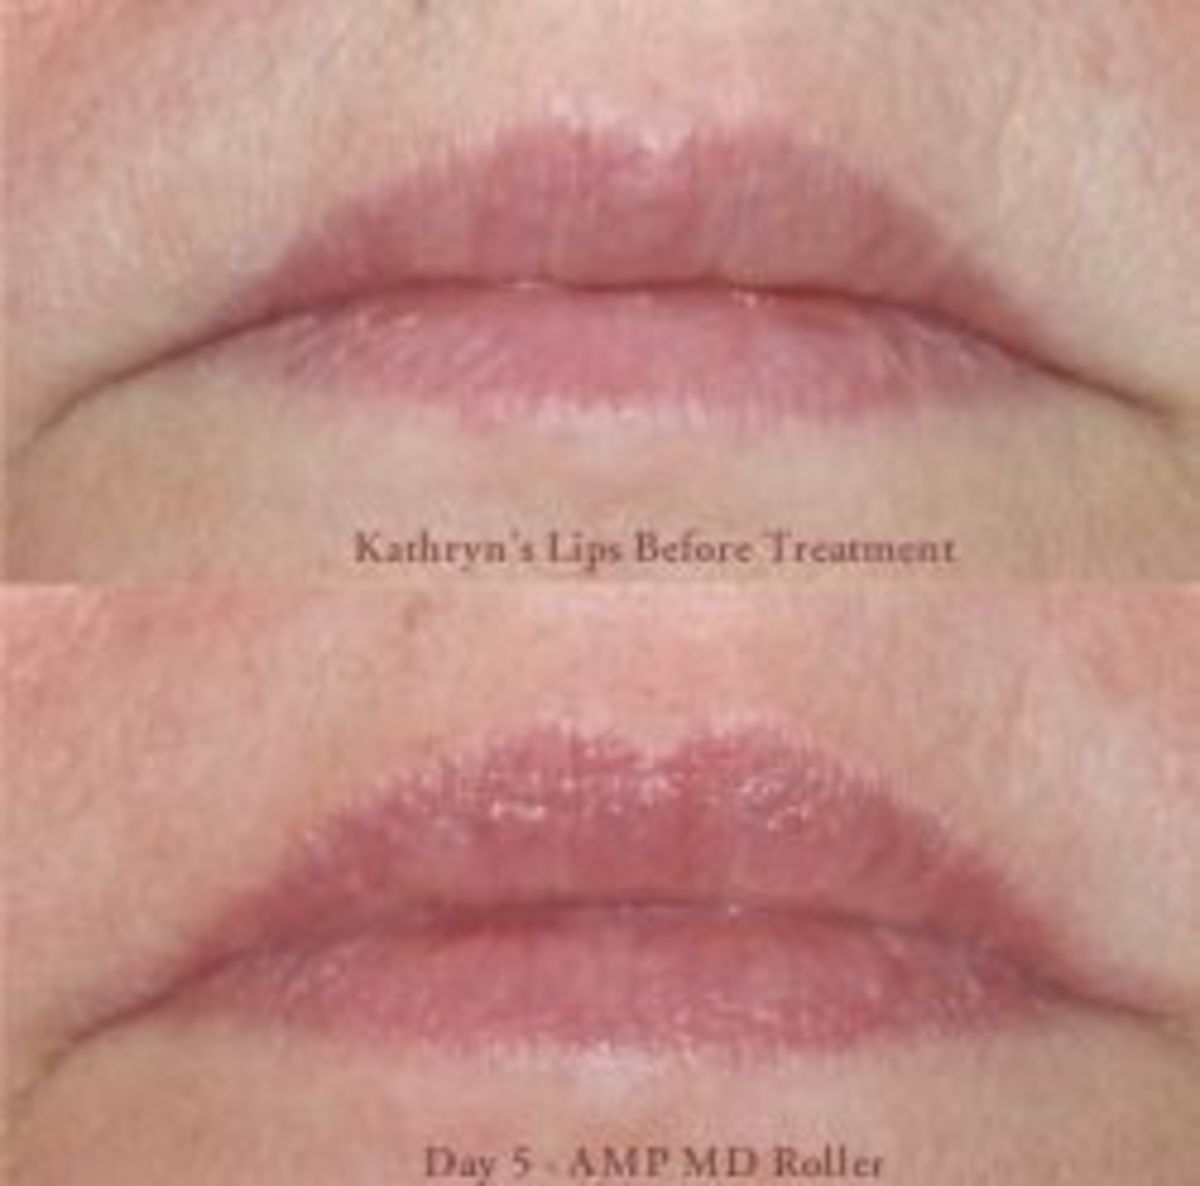 Kathryn's lips before & after